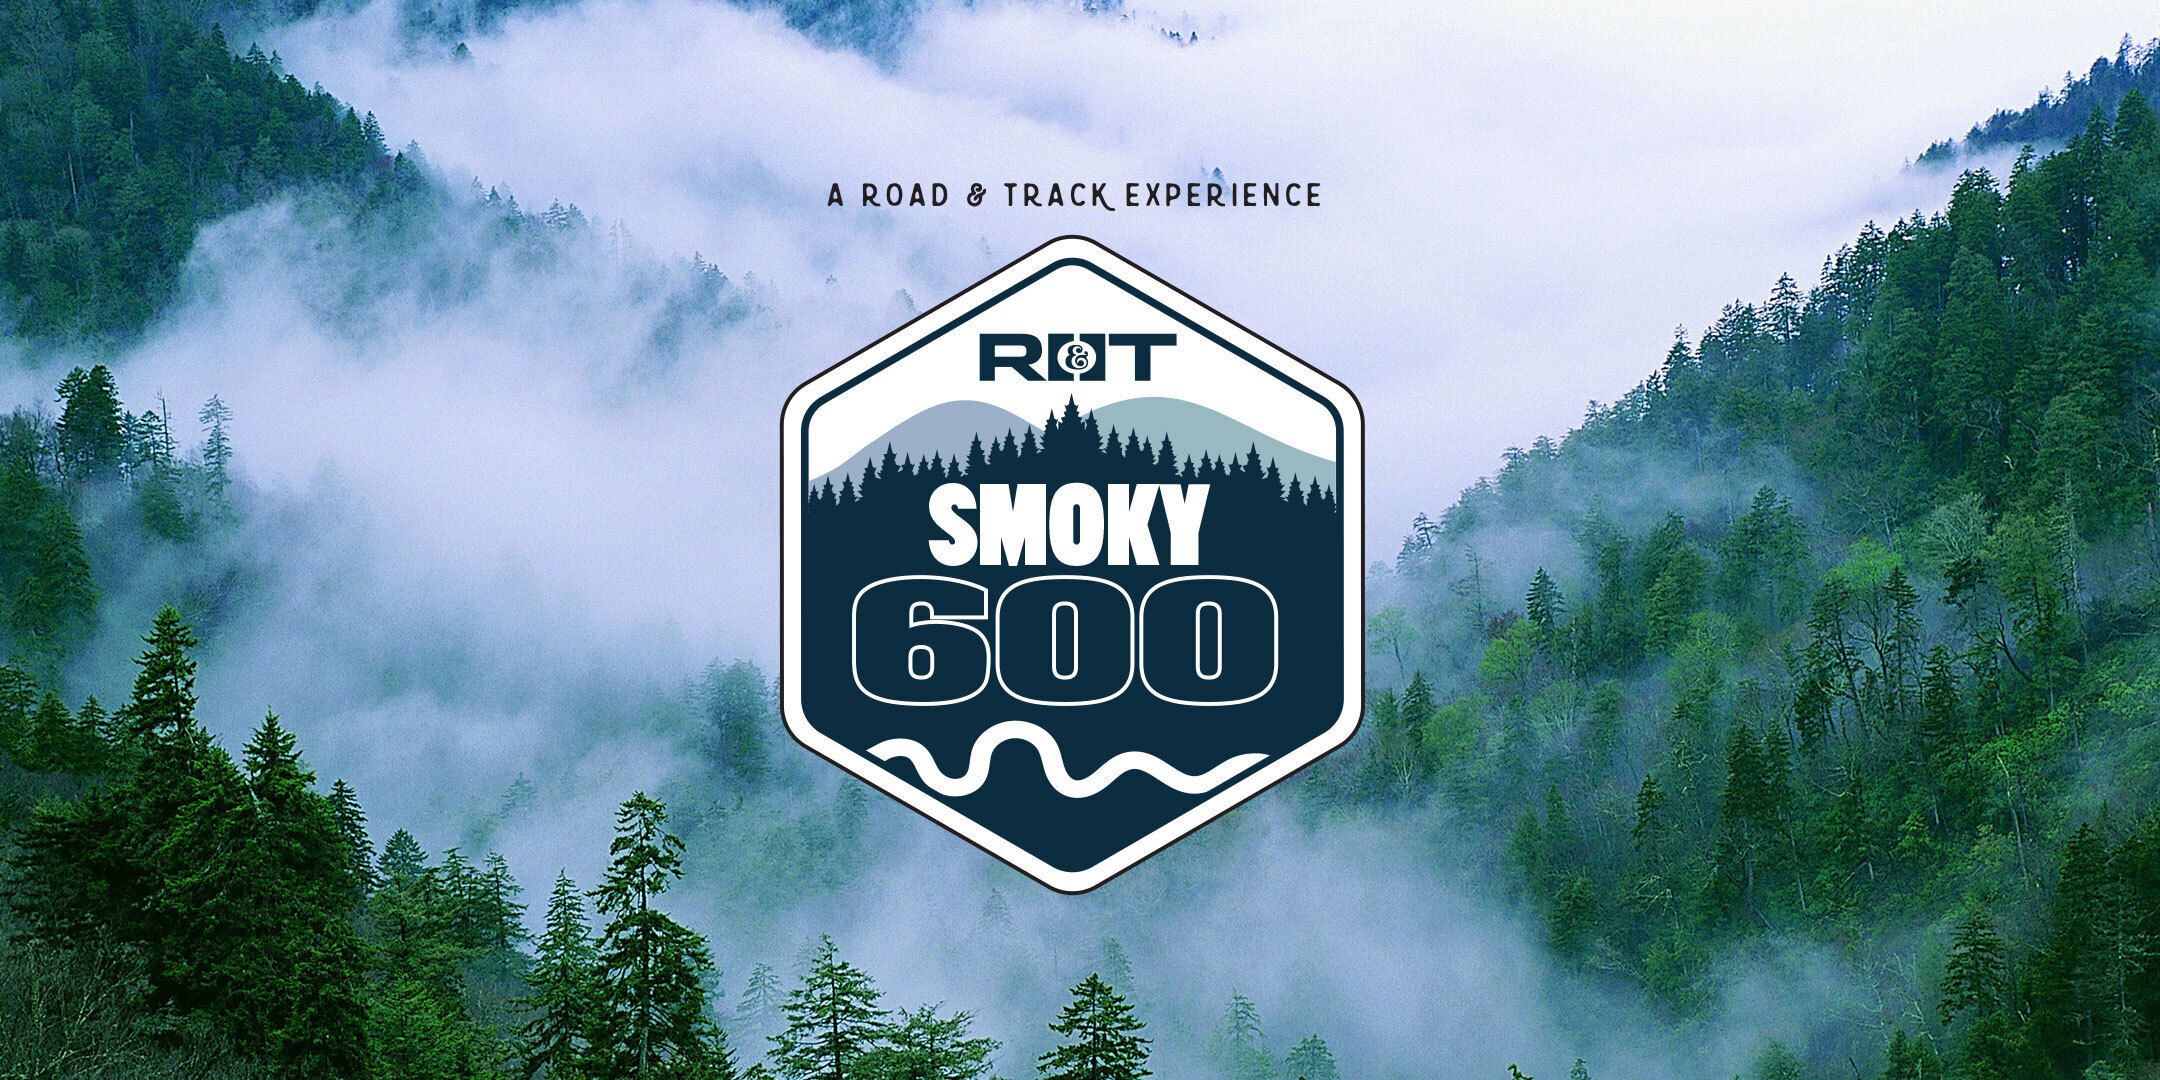 Come Tame the Smoky Mountains With Road & Track